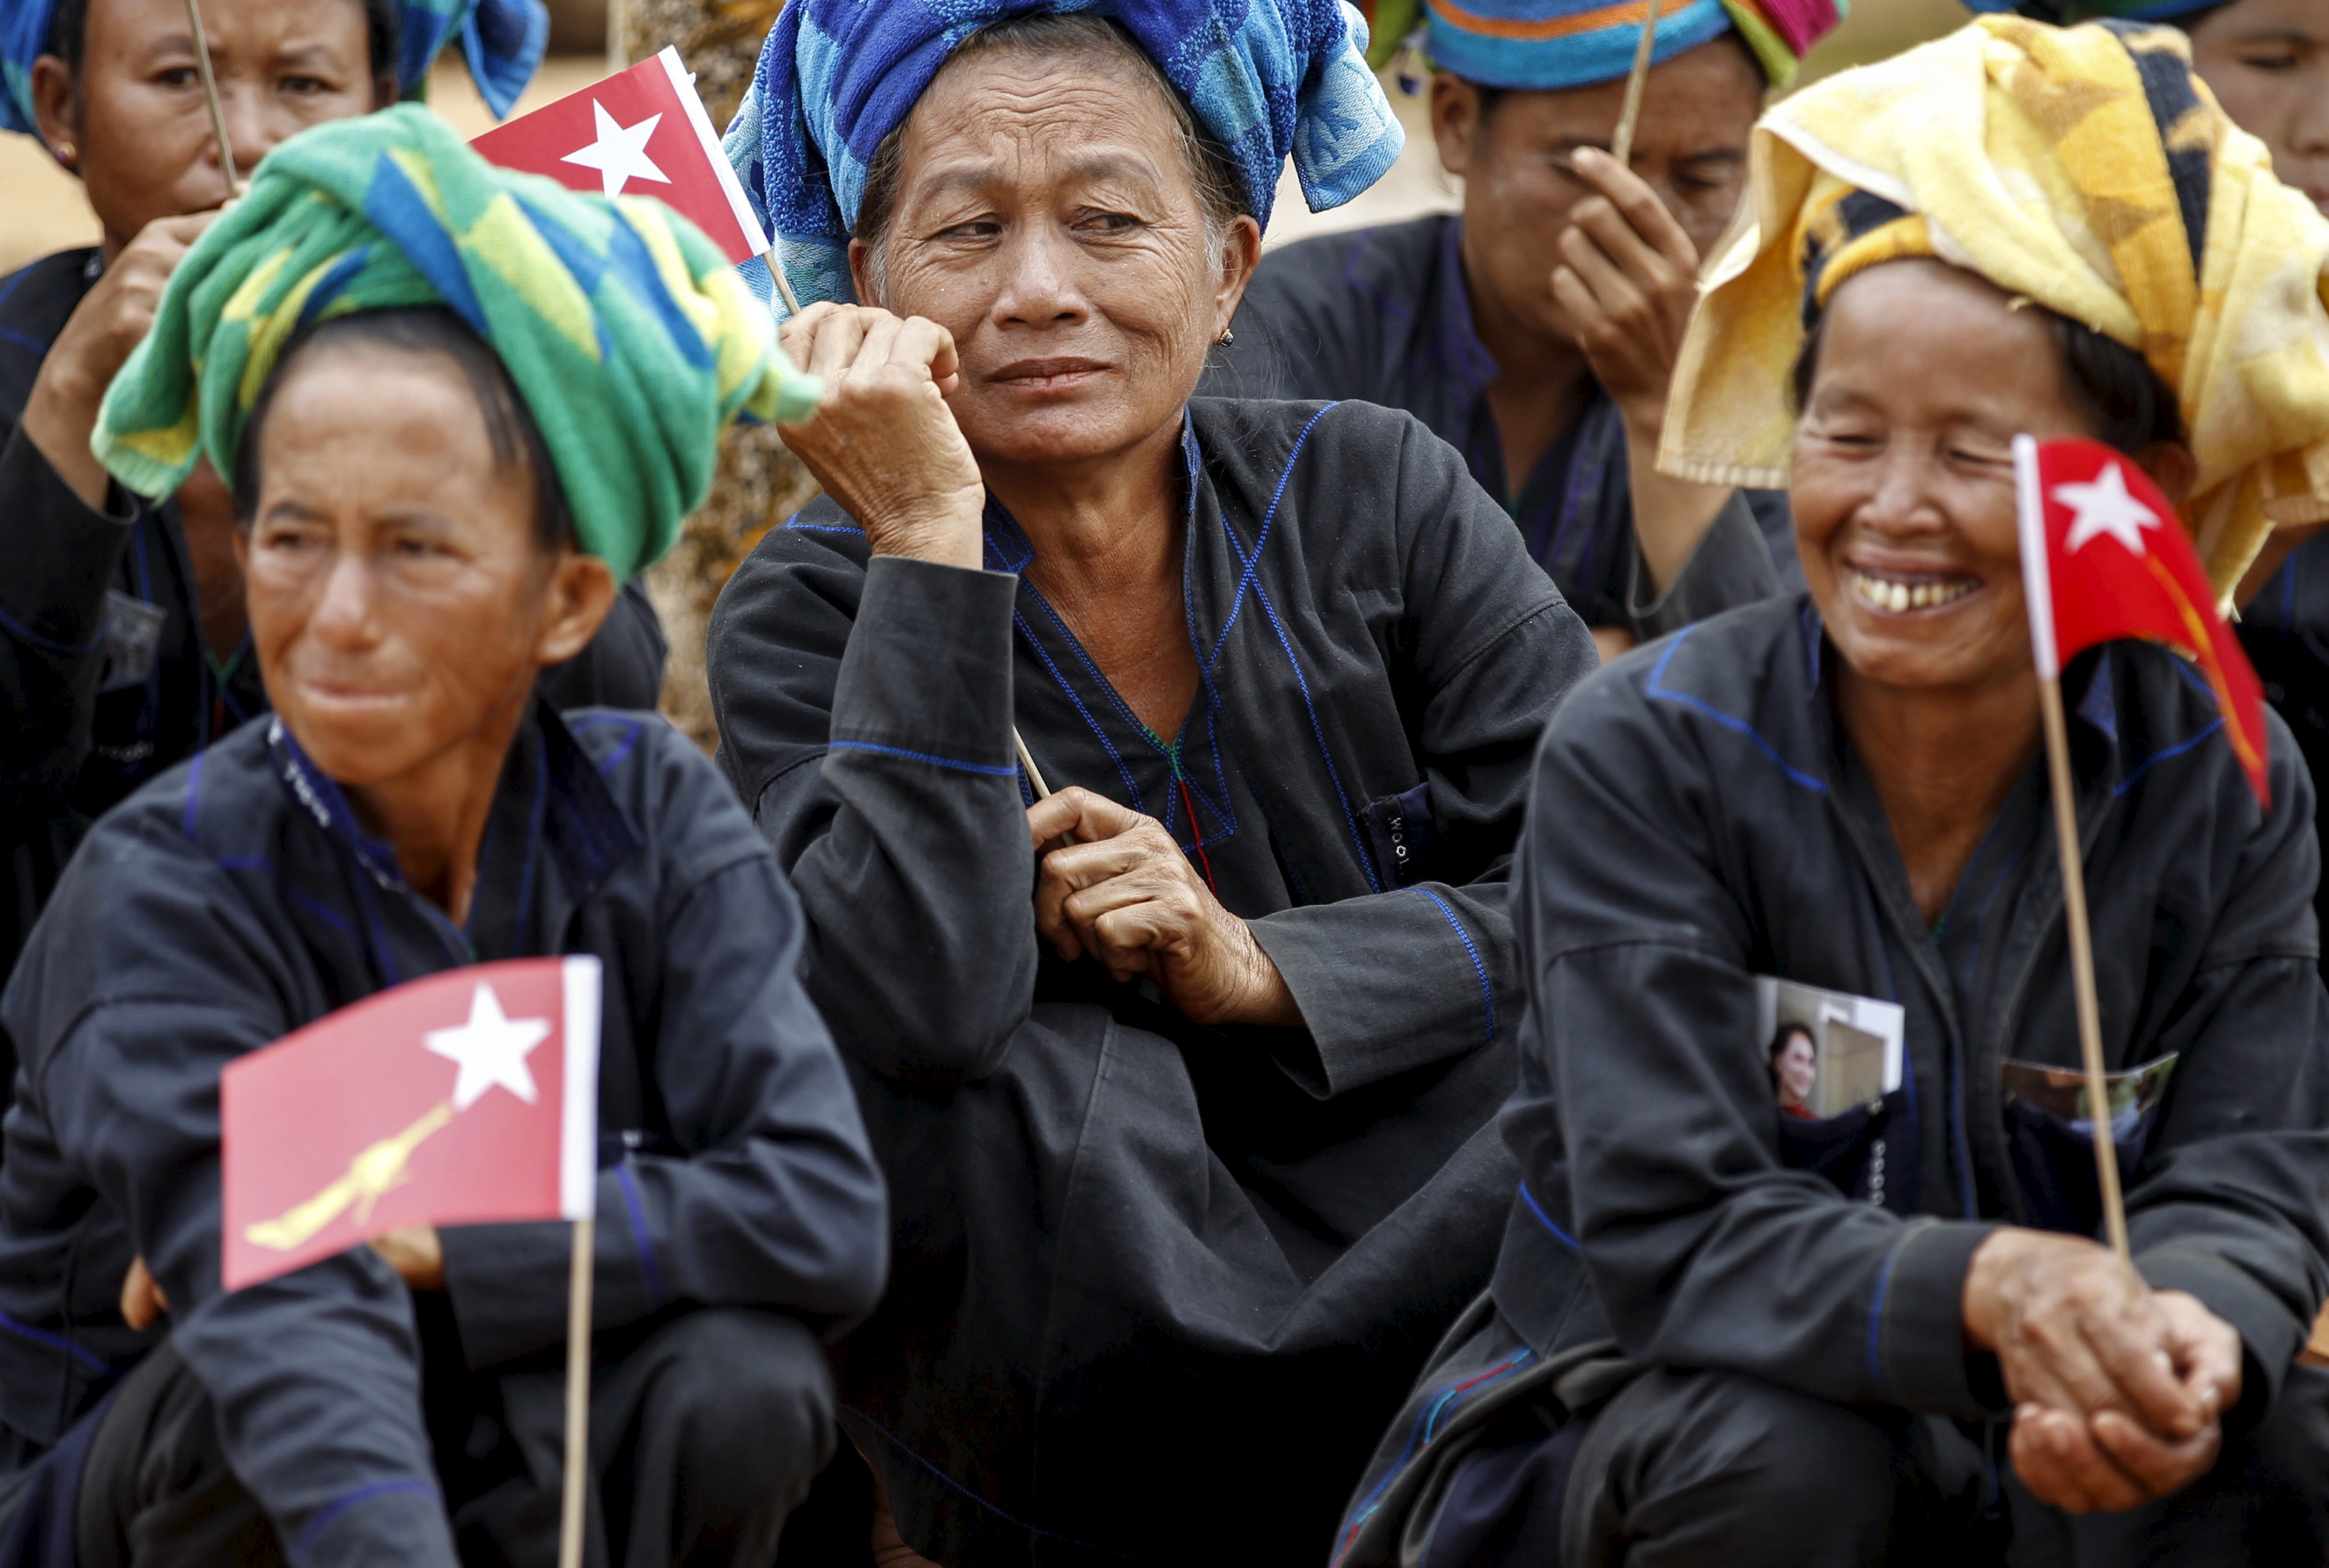 Ethnic Pa'O women sit as they wait for Burmese pro-democracy leader Aung San Suu Kyi to arrive to speak on voter education at the Hsiseng township in Shan state, Myanmar Sept. 5, 2015 (Soe Zeya Tun—Reuters)